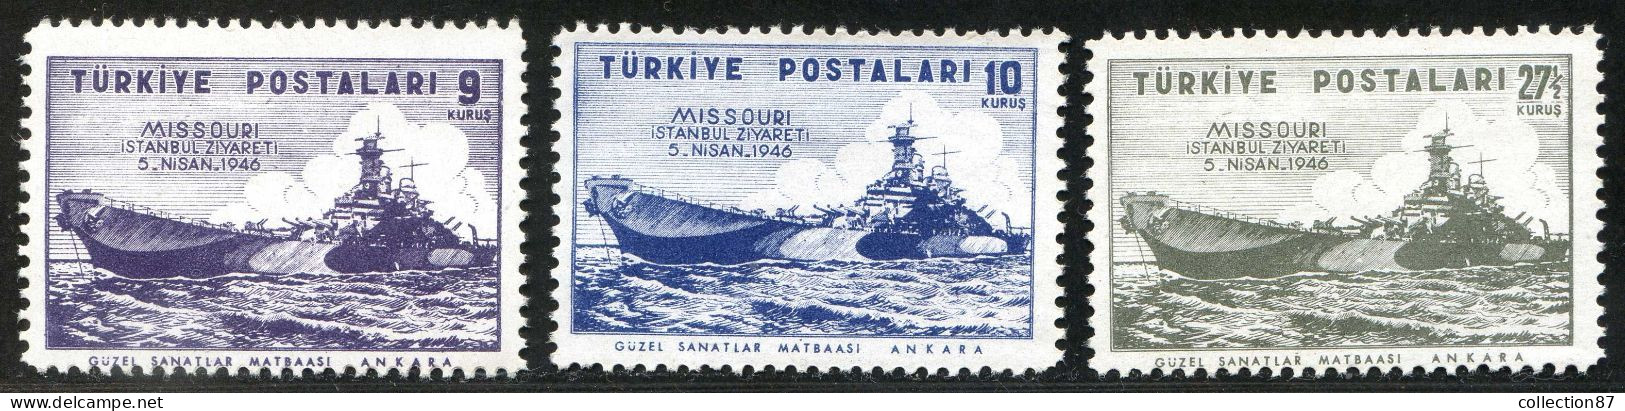 REF 091 > TURQUIE < Yv N° 1037 à 1039 * * < Neuf Luxe Dos Visible MNH * * - Turkey - Neufs